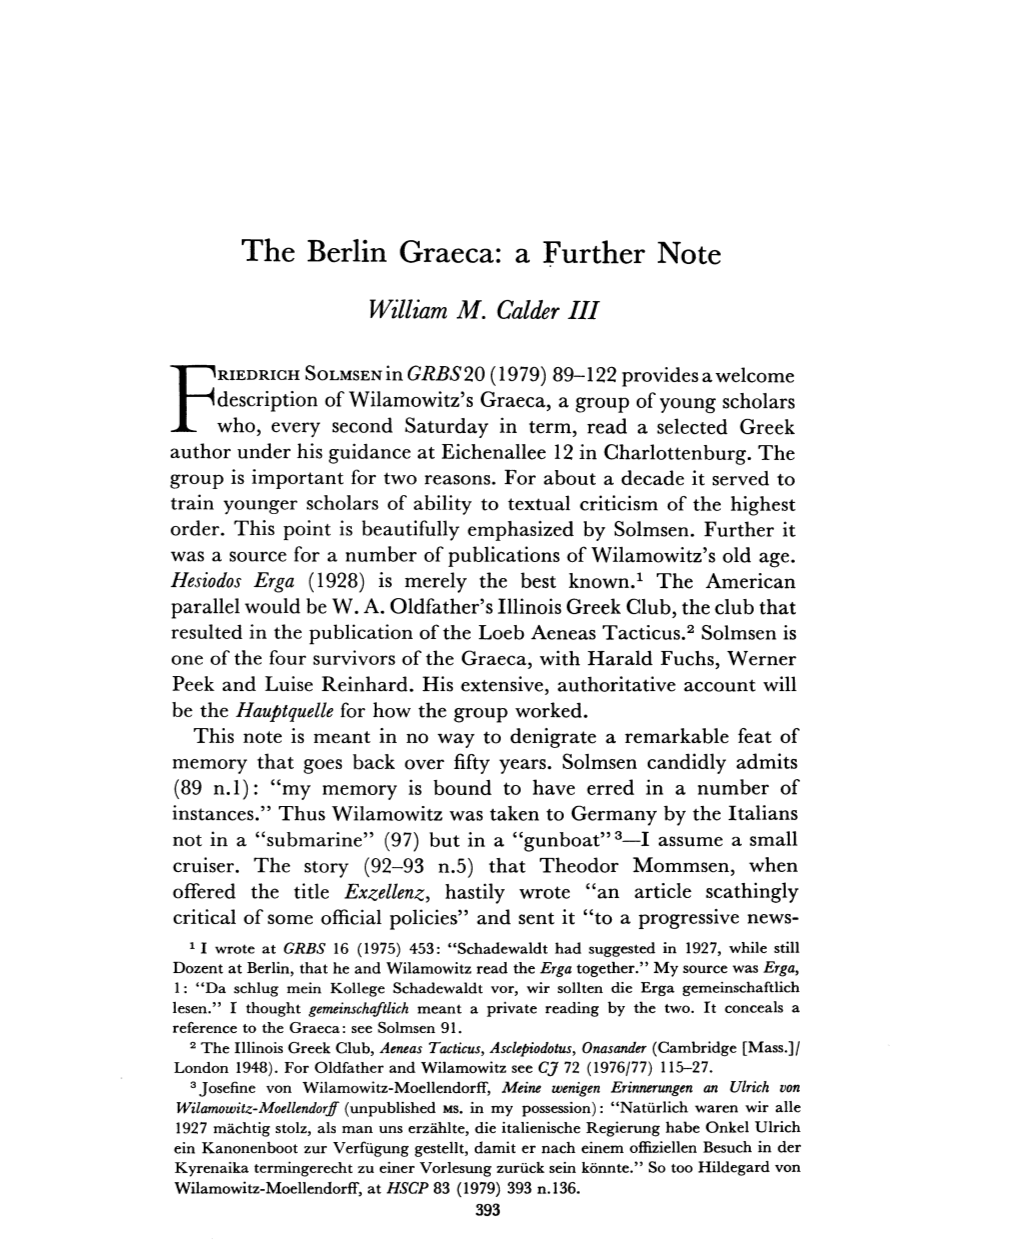 The Berlin Graeca: a Further Note Calder, William M Greek, Roman and Byzantine Studies; Winter 1979; 20, 4; Periodicals Archive Online Pg